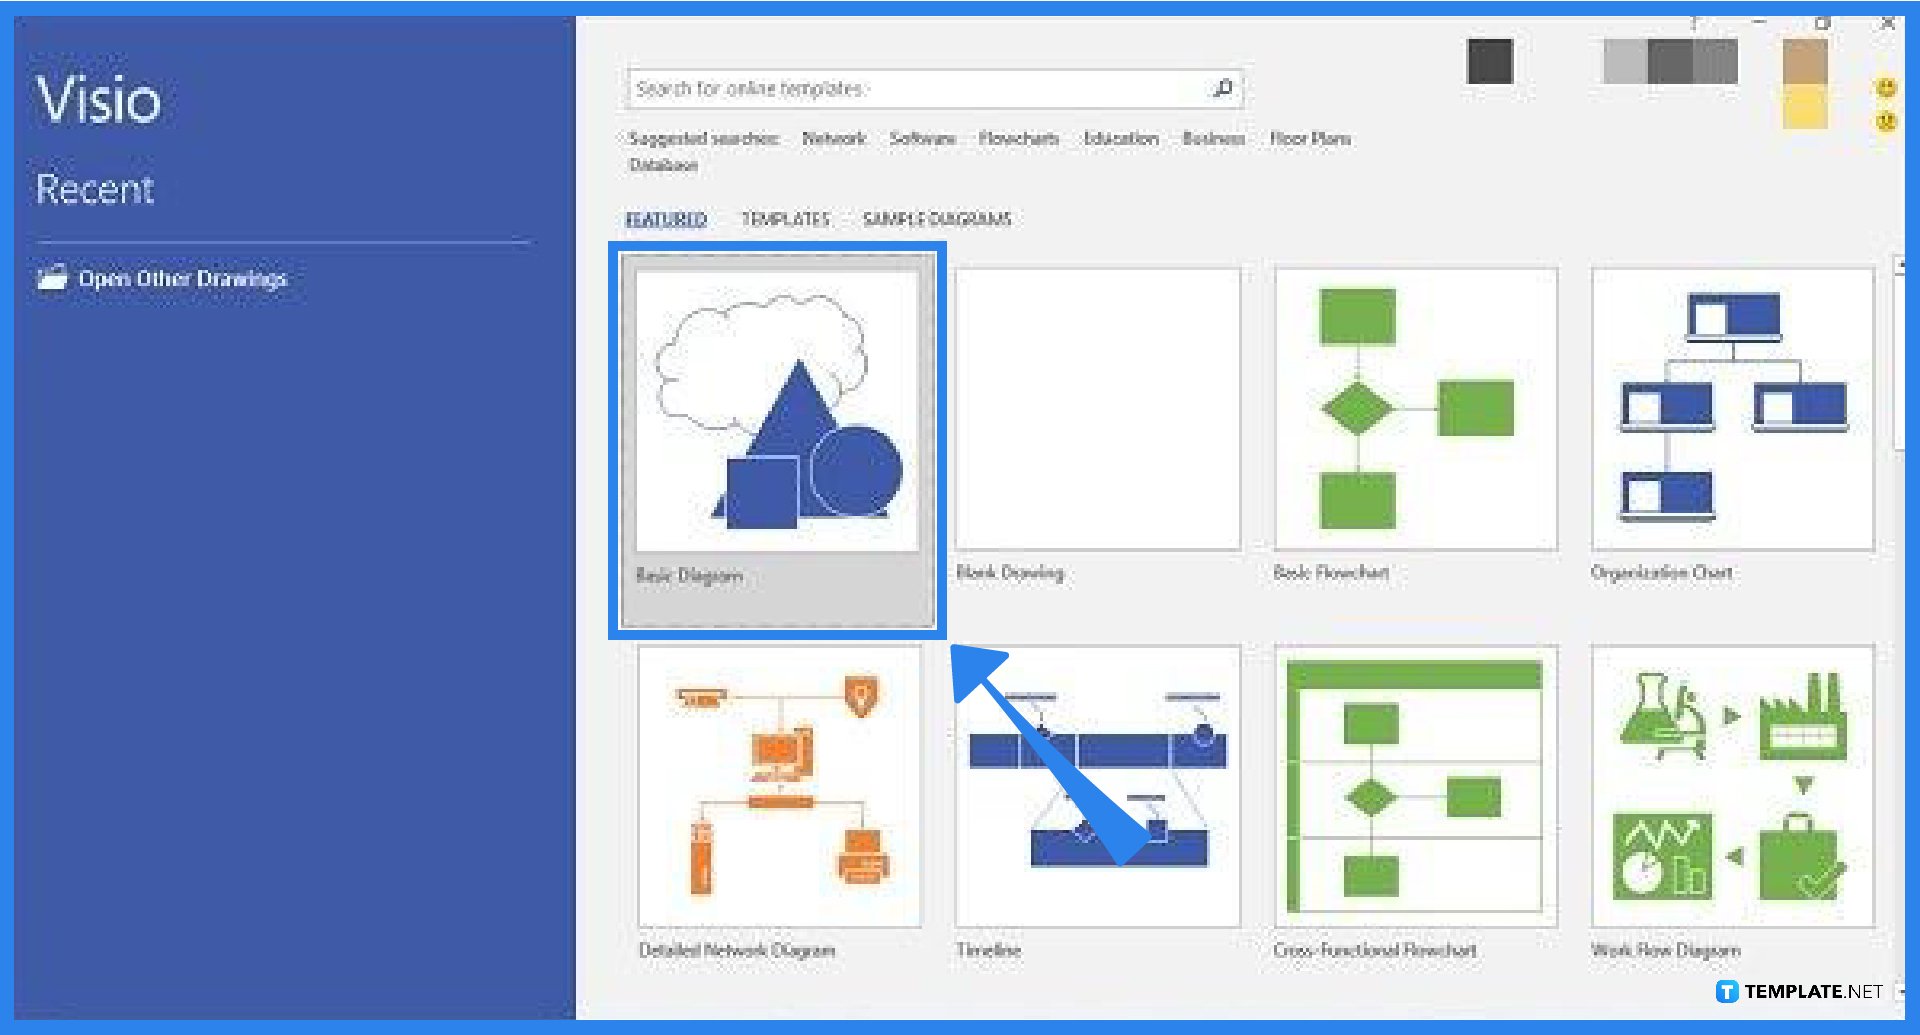 How to Access Microsoft Visio - Step 5